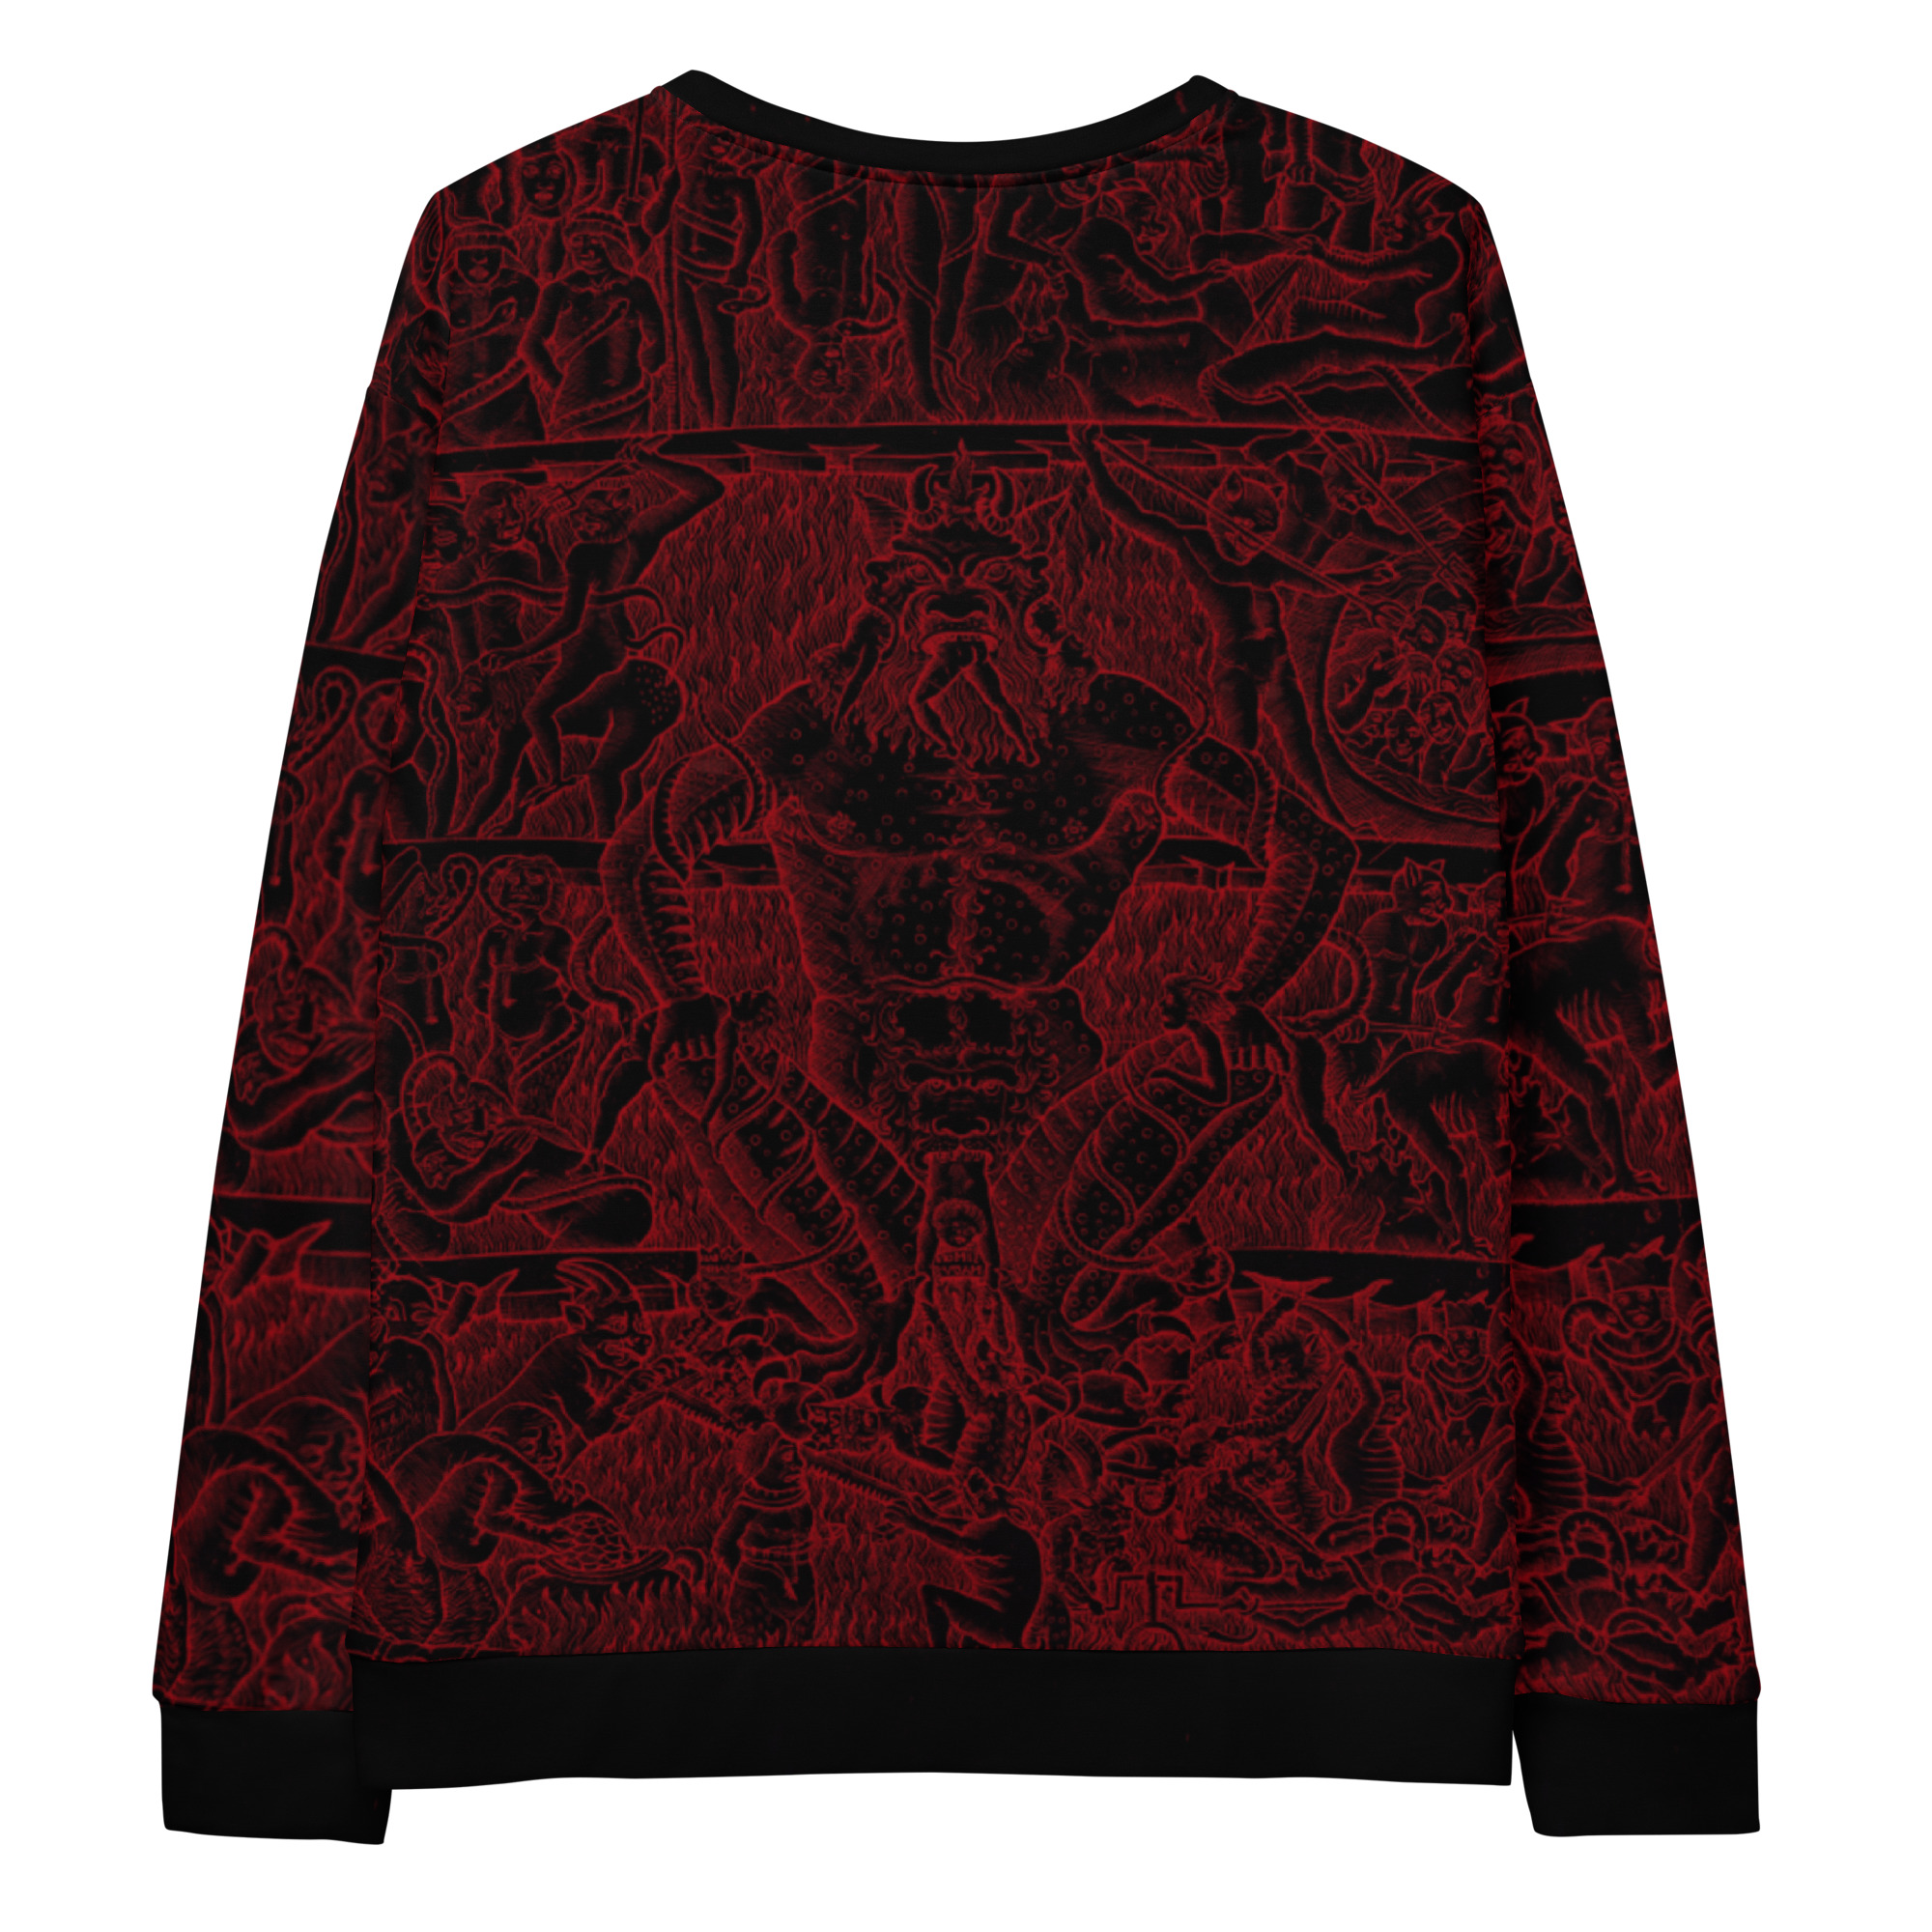 Featured image for “The Inferno. Blood Red - Unisex Sweatshirt”